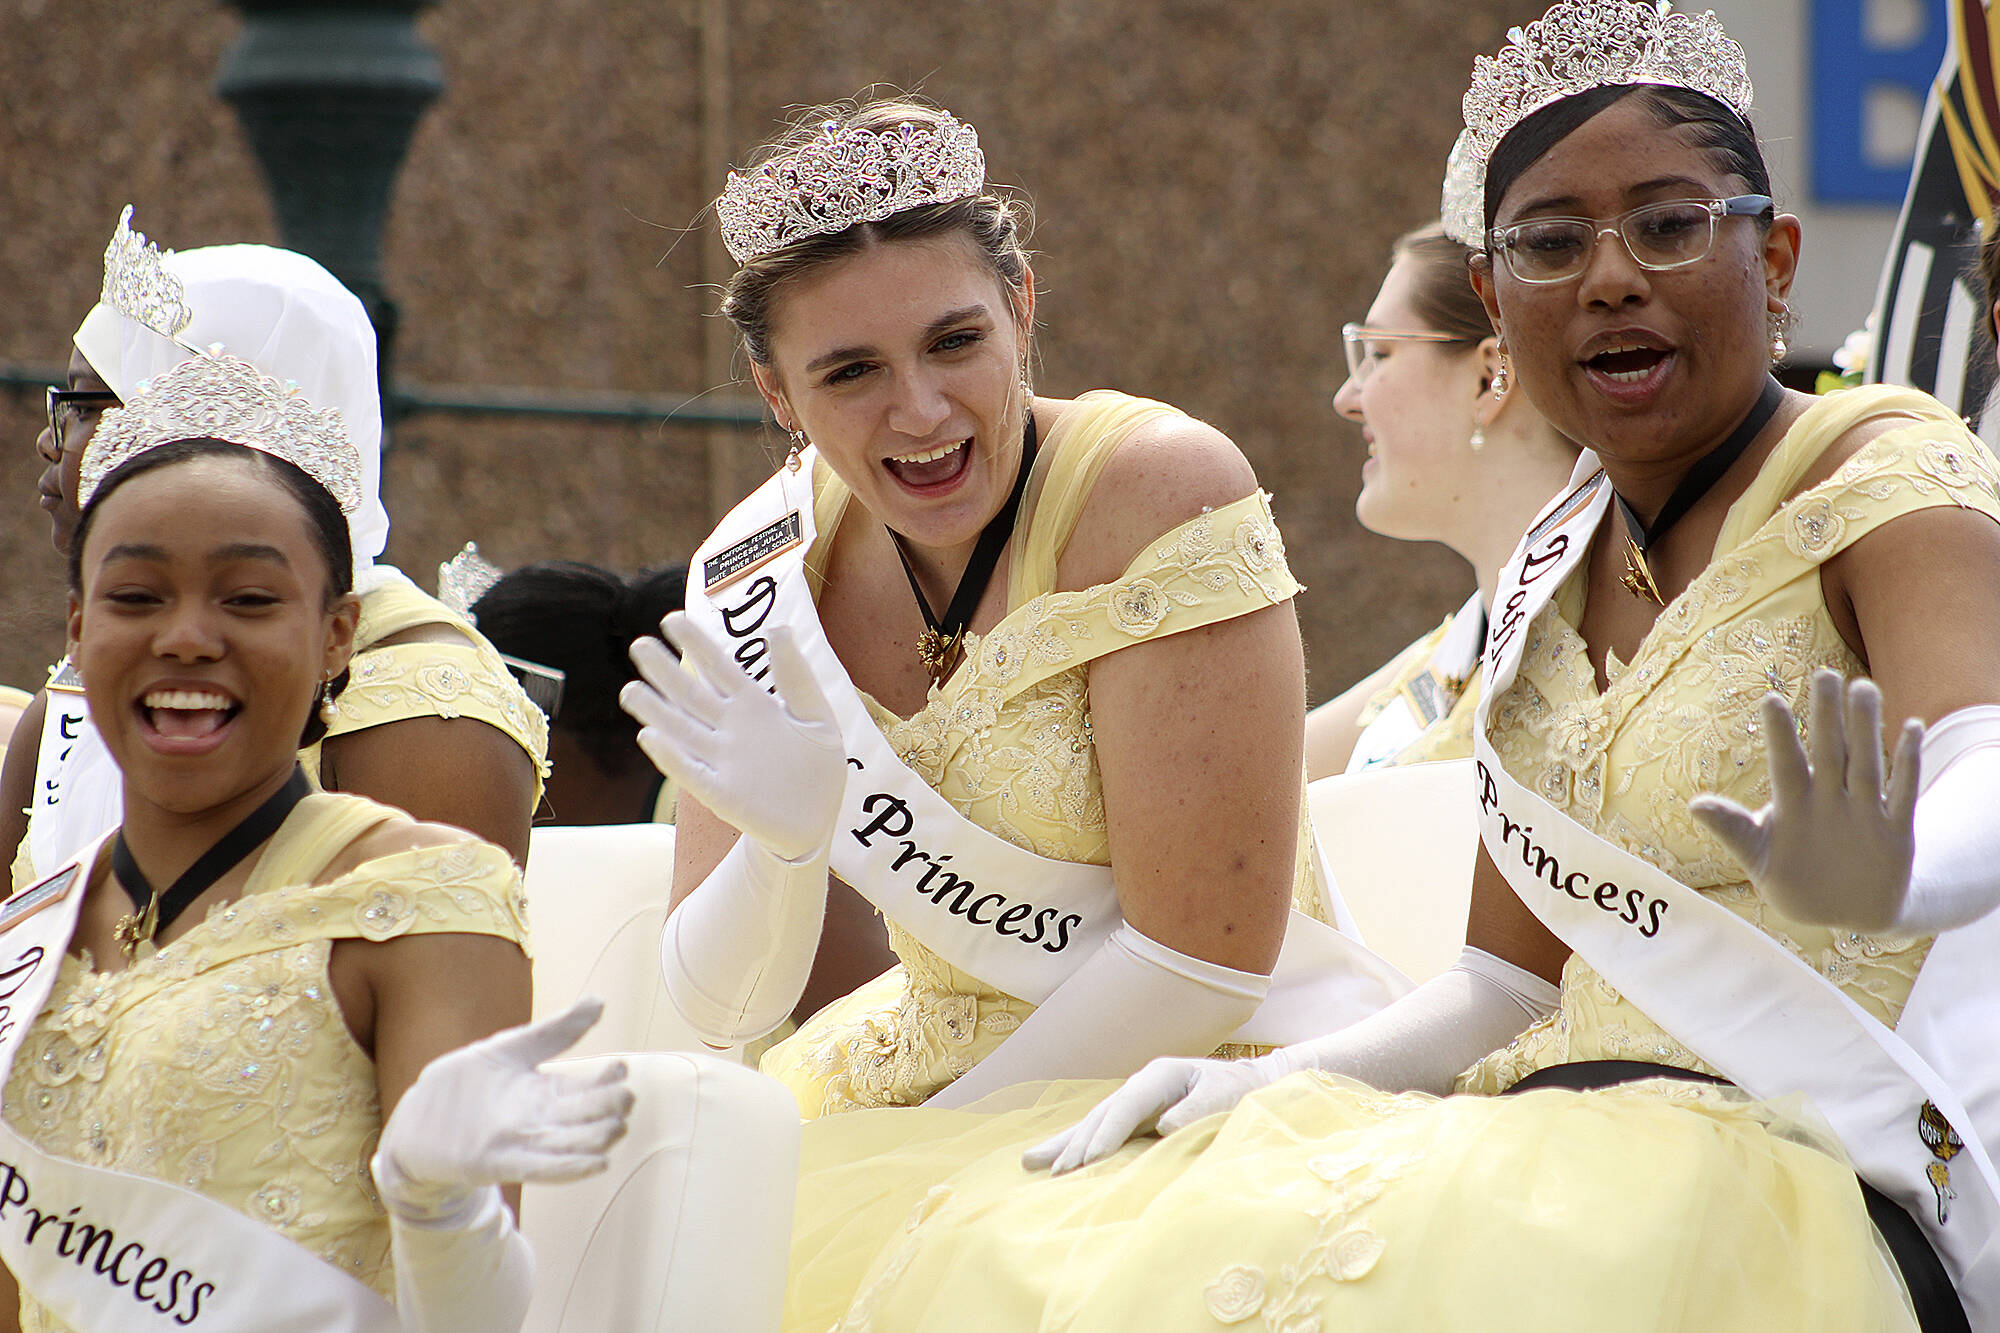 White River High School’s Princess Julia Schmidt, center, waves to crowds as the parade rolls through Sumner on April 9. Photo by Ray Miller-Still